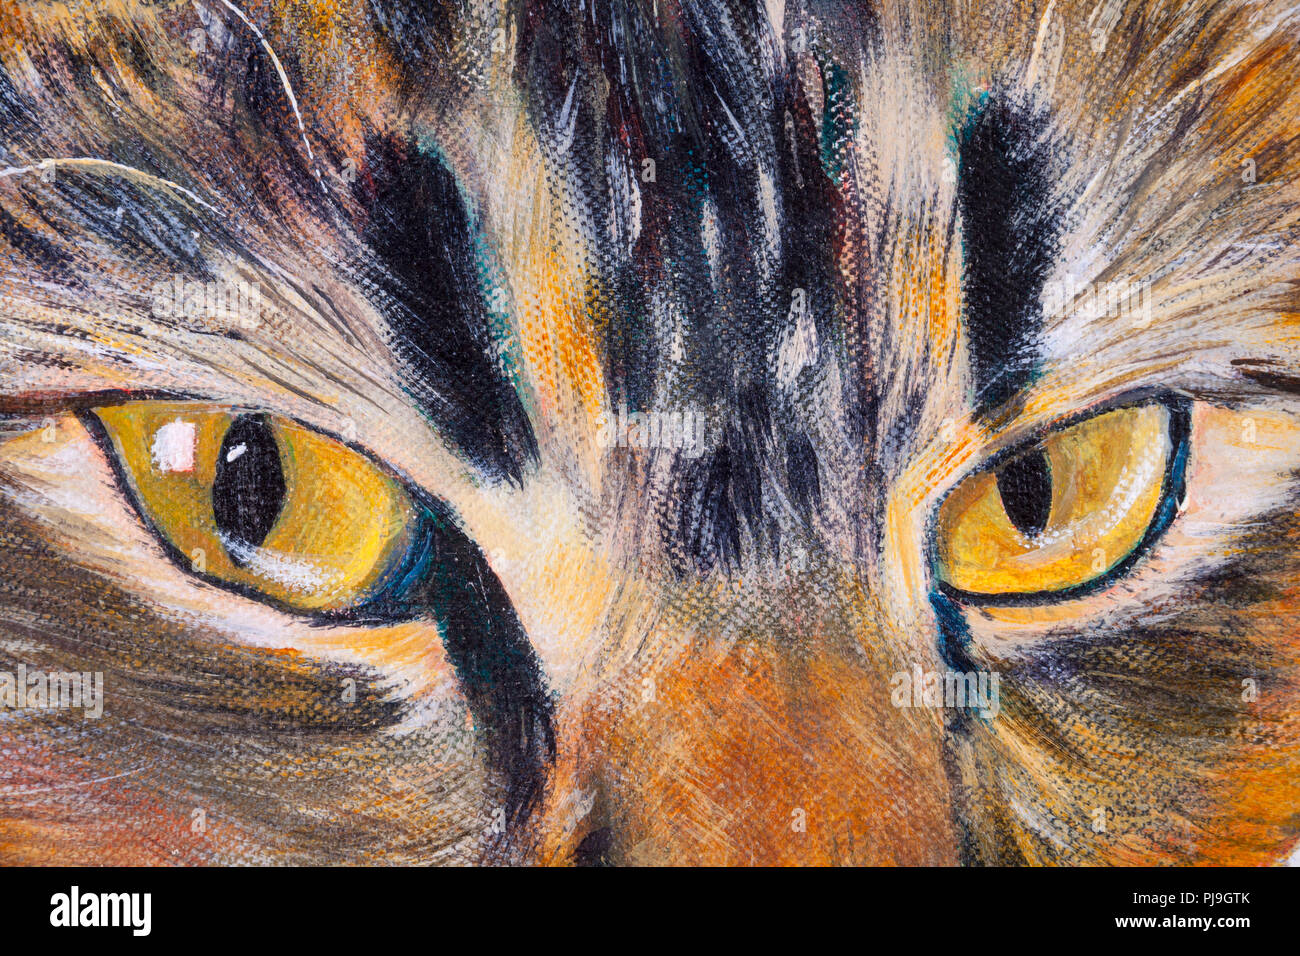 Details of acrylic paintings showing colour, textures and techniques. A cats eyes close up. Stock Photo